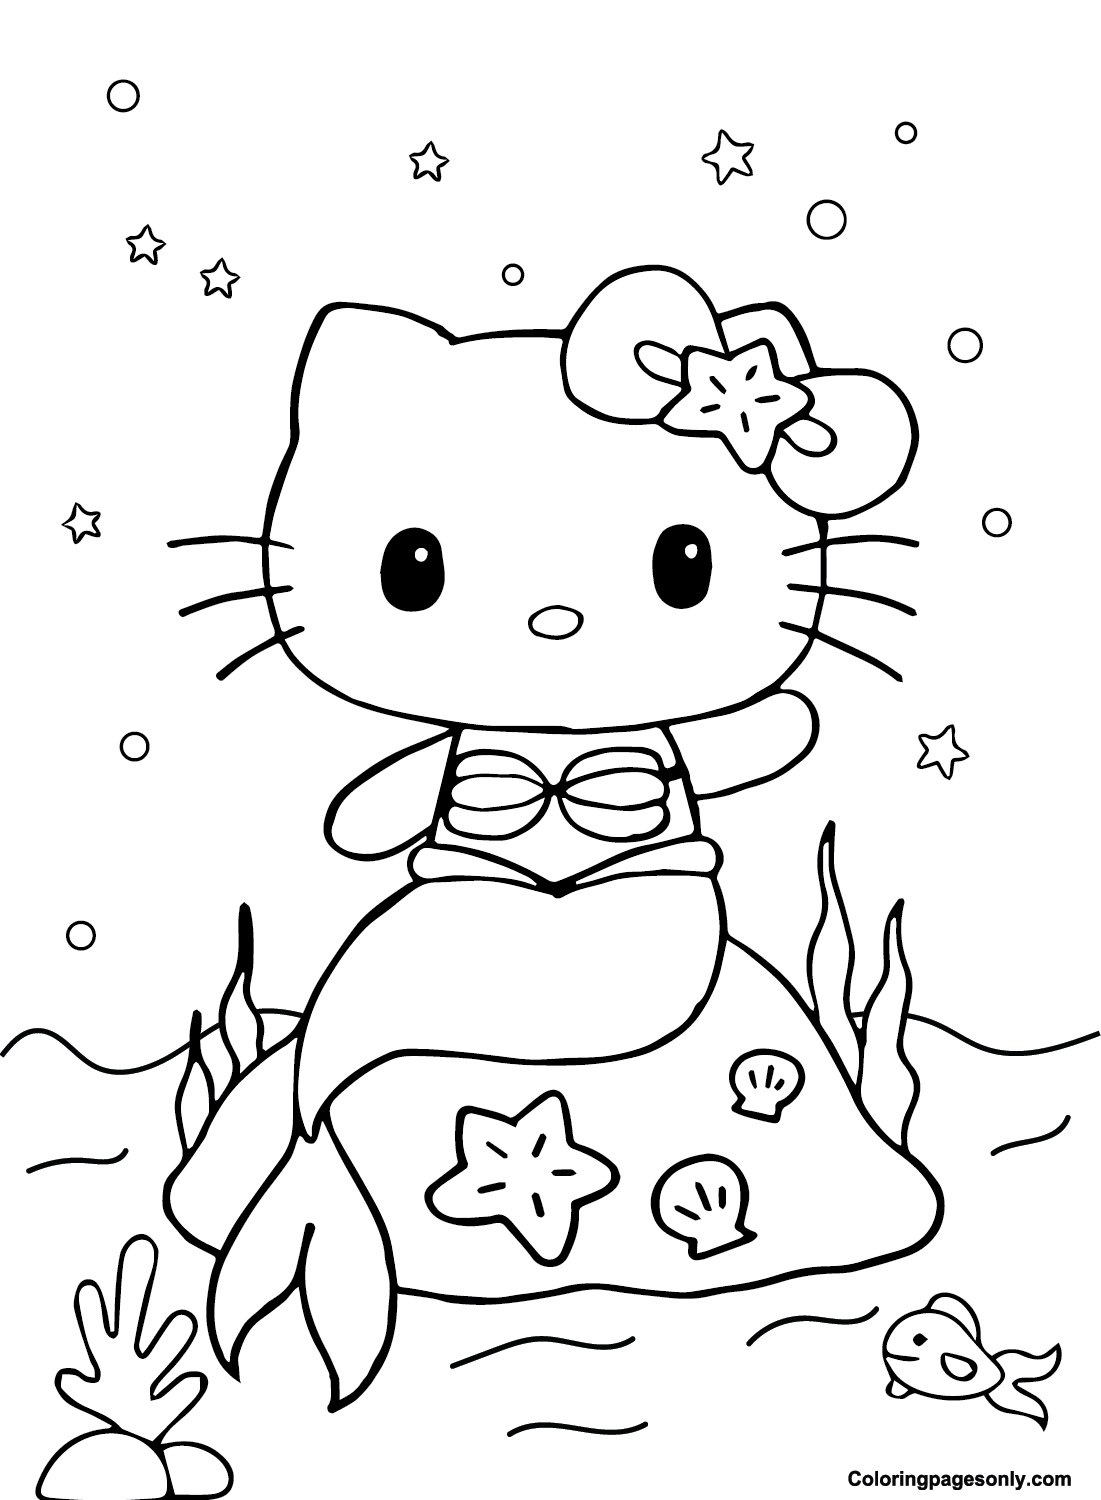 Top 9 Hello Kitty Coloring Books